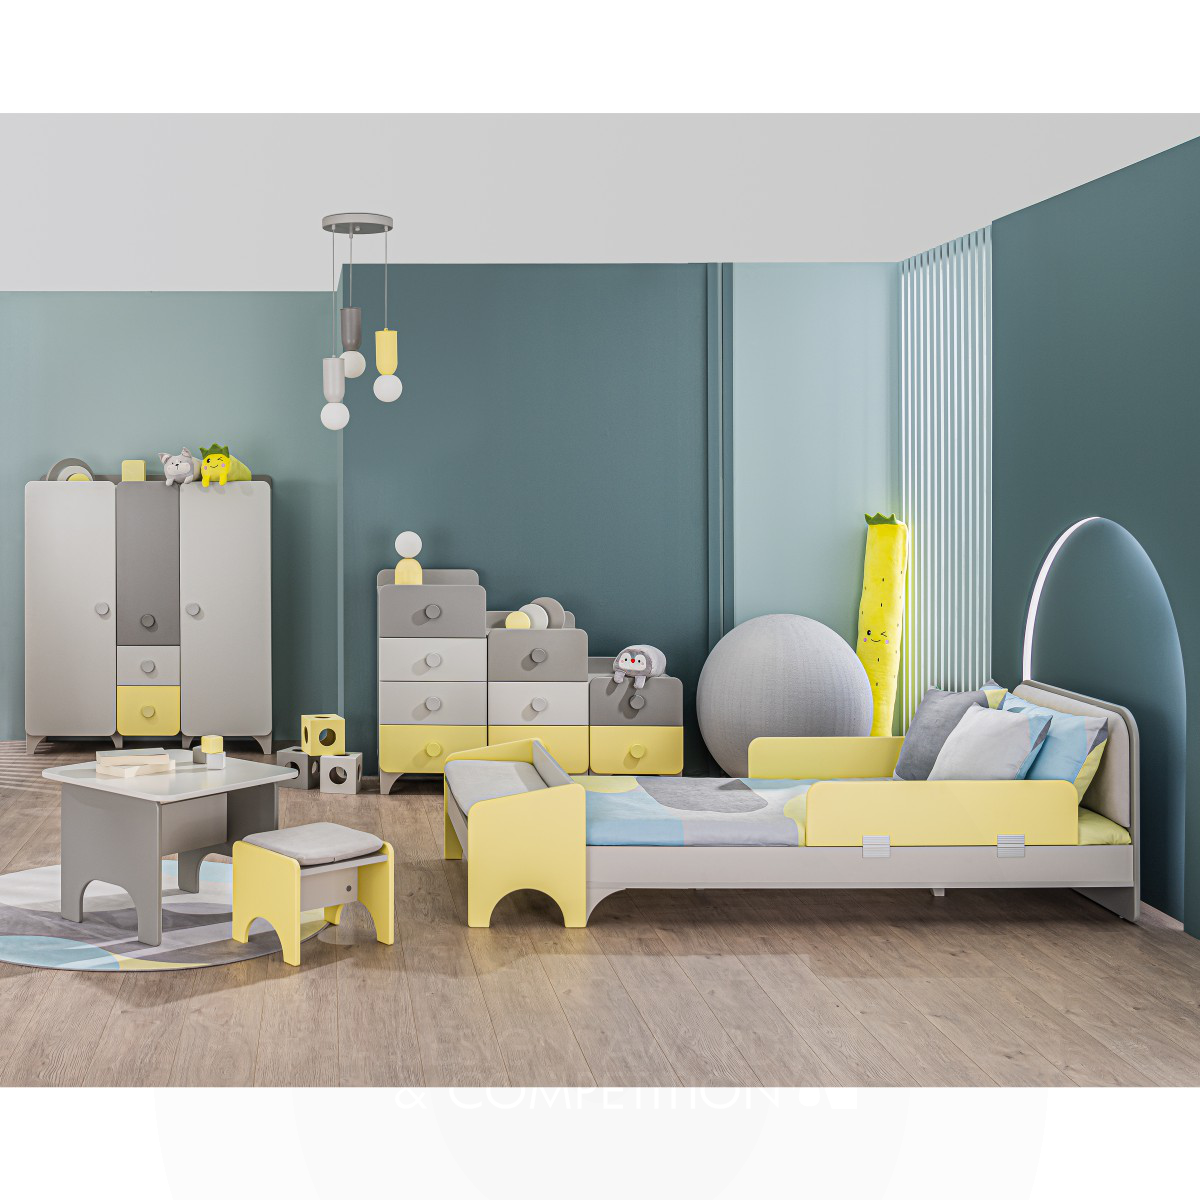 Klaris Roditi wins Iron at the prestigious A' Baby, Kids and Children's Products Design Award with Minia Collection Child Room Furniture Set.